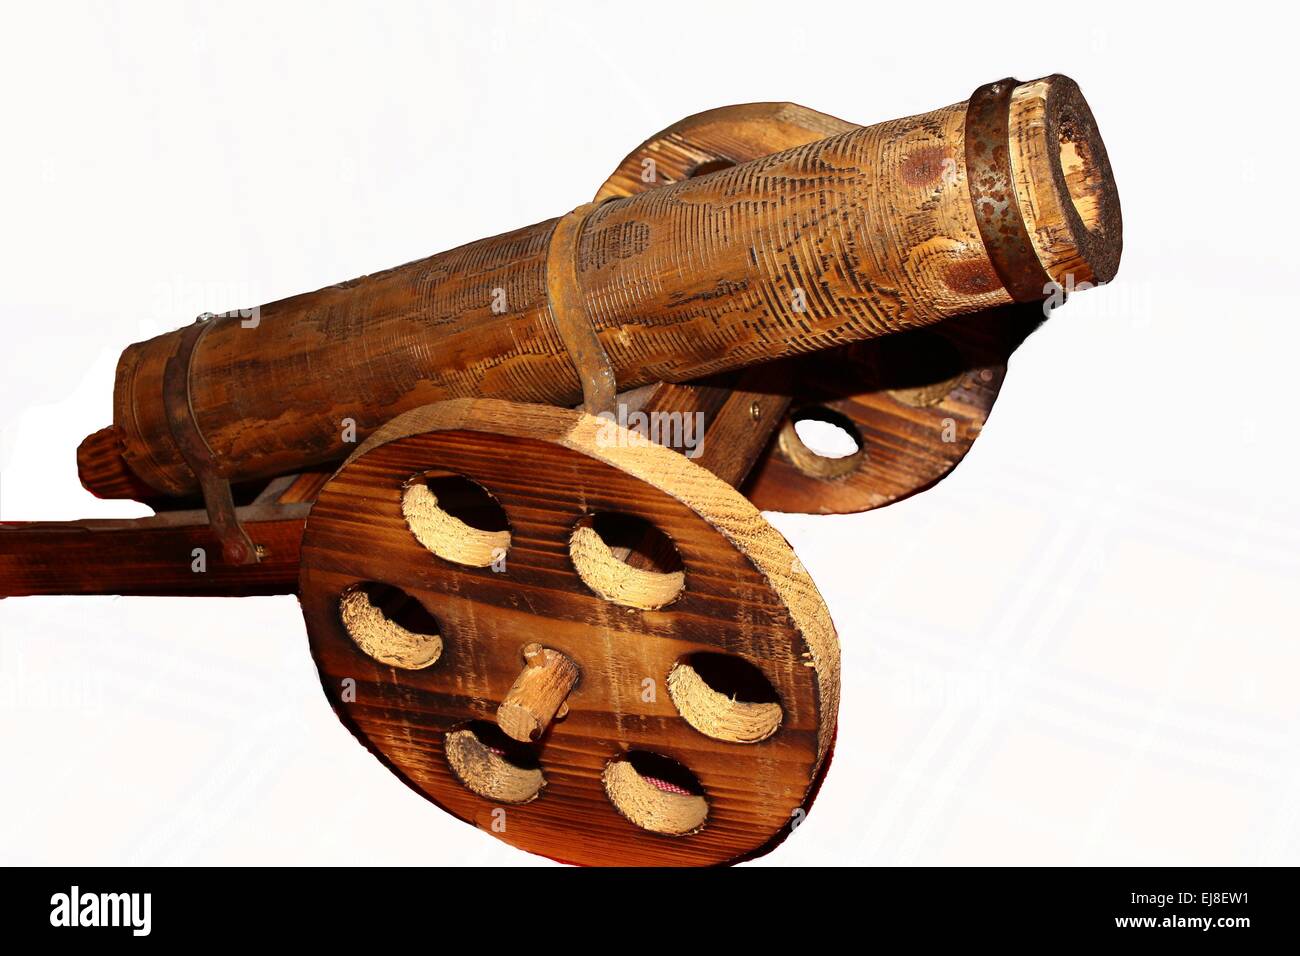 Wooden cannon statue Stock Photo